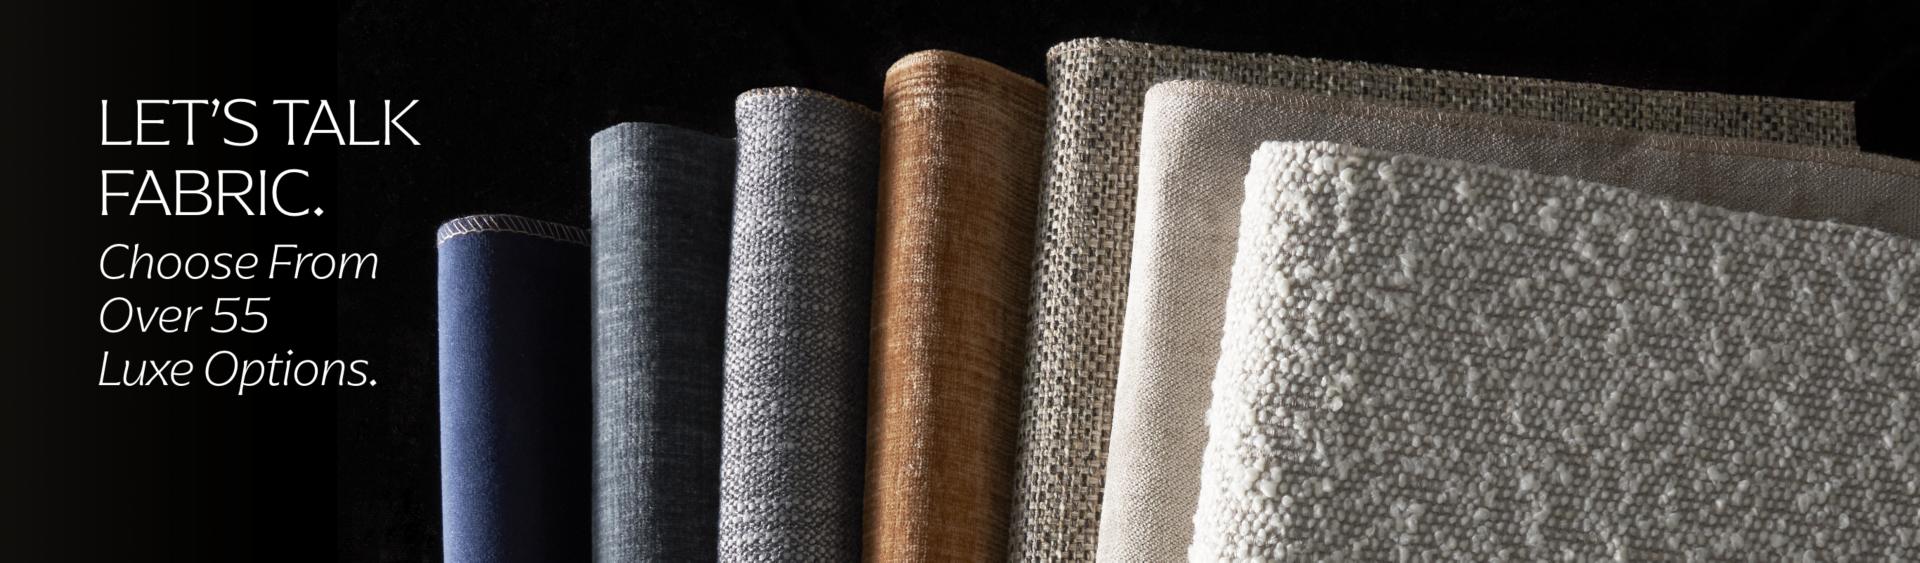 Lets talk fabric. Choose from over 55 luxe options.